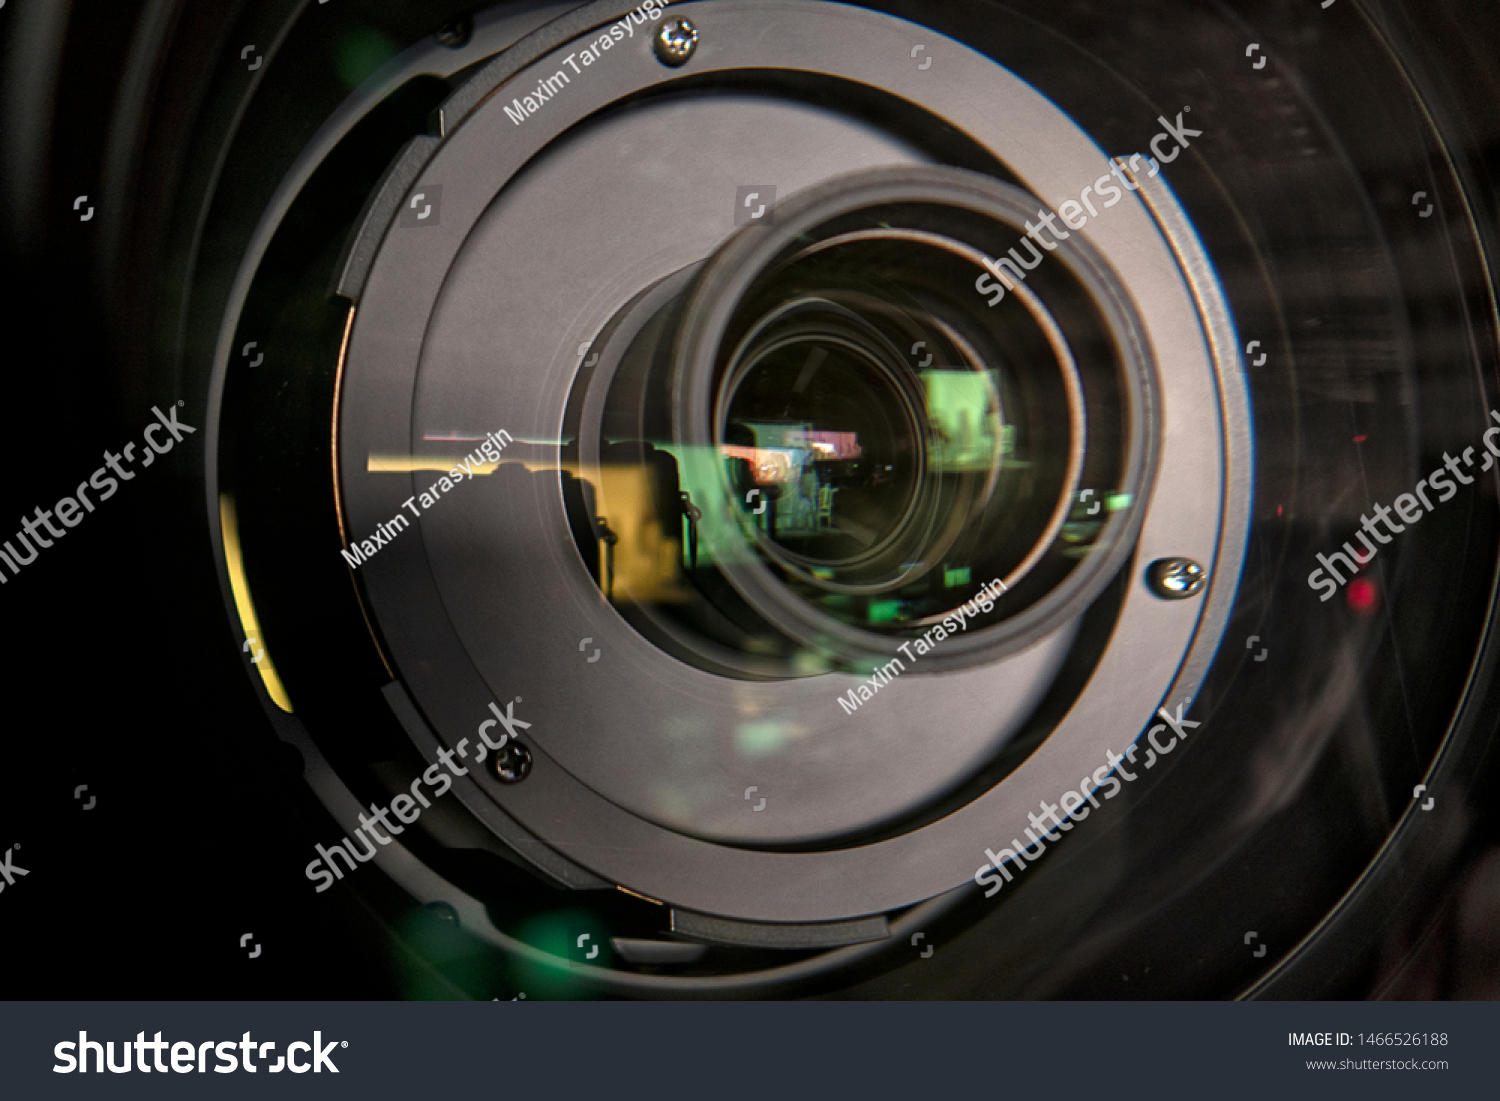 close up of a television lens  on a dark background.
Camera lens,Macro of an iris,Camera - Photographic Equipment, Lens - Optical Instrument, Circle, Metal, Single Object. #1466526188